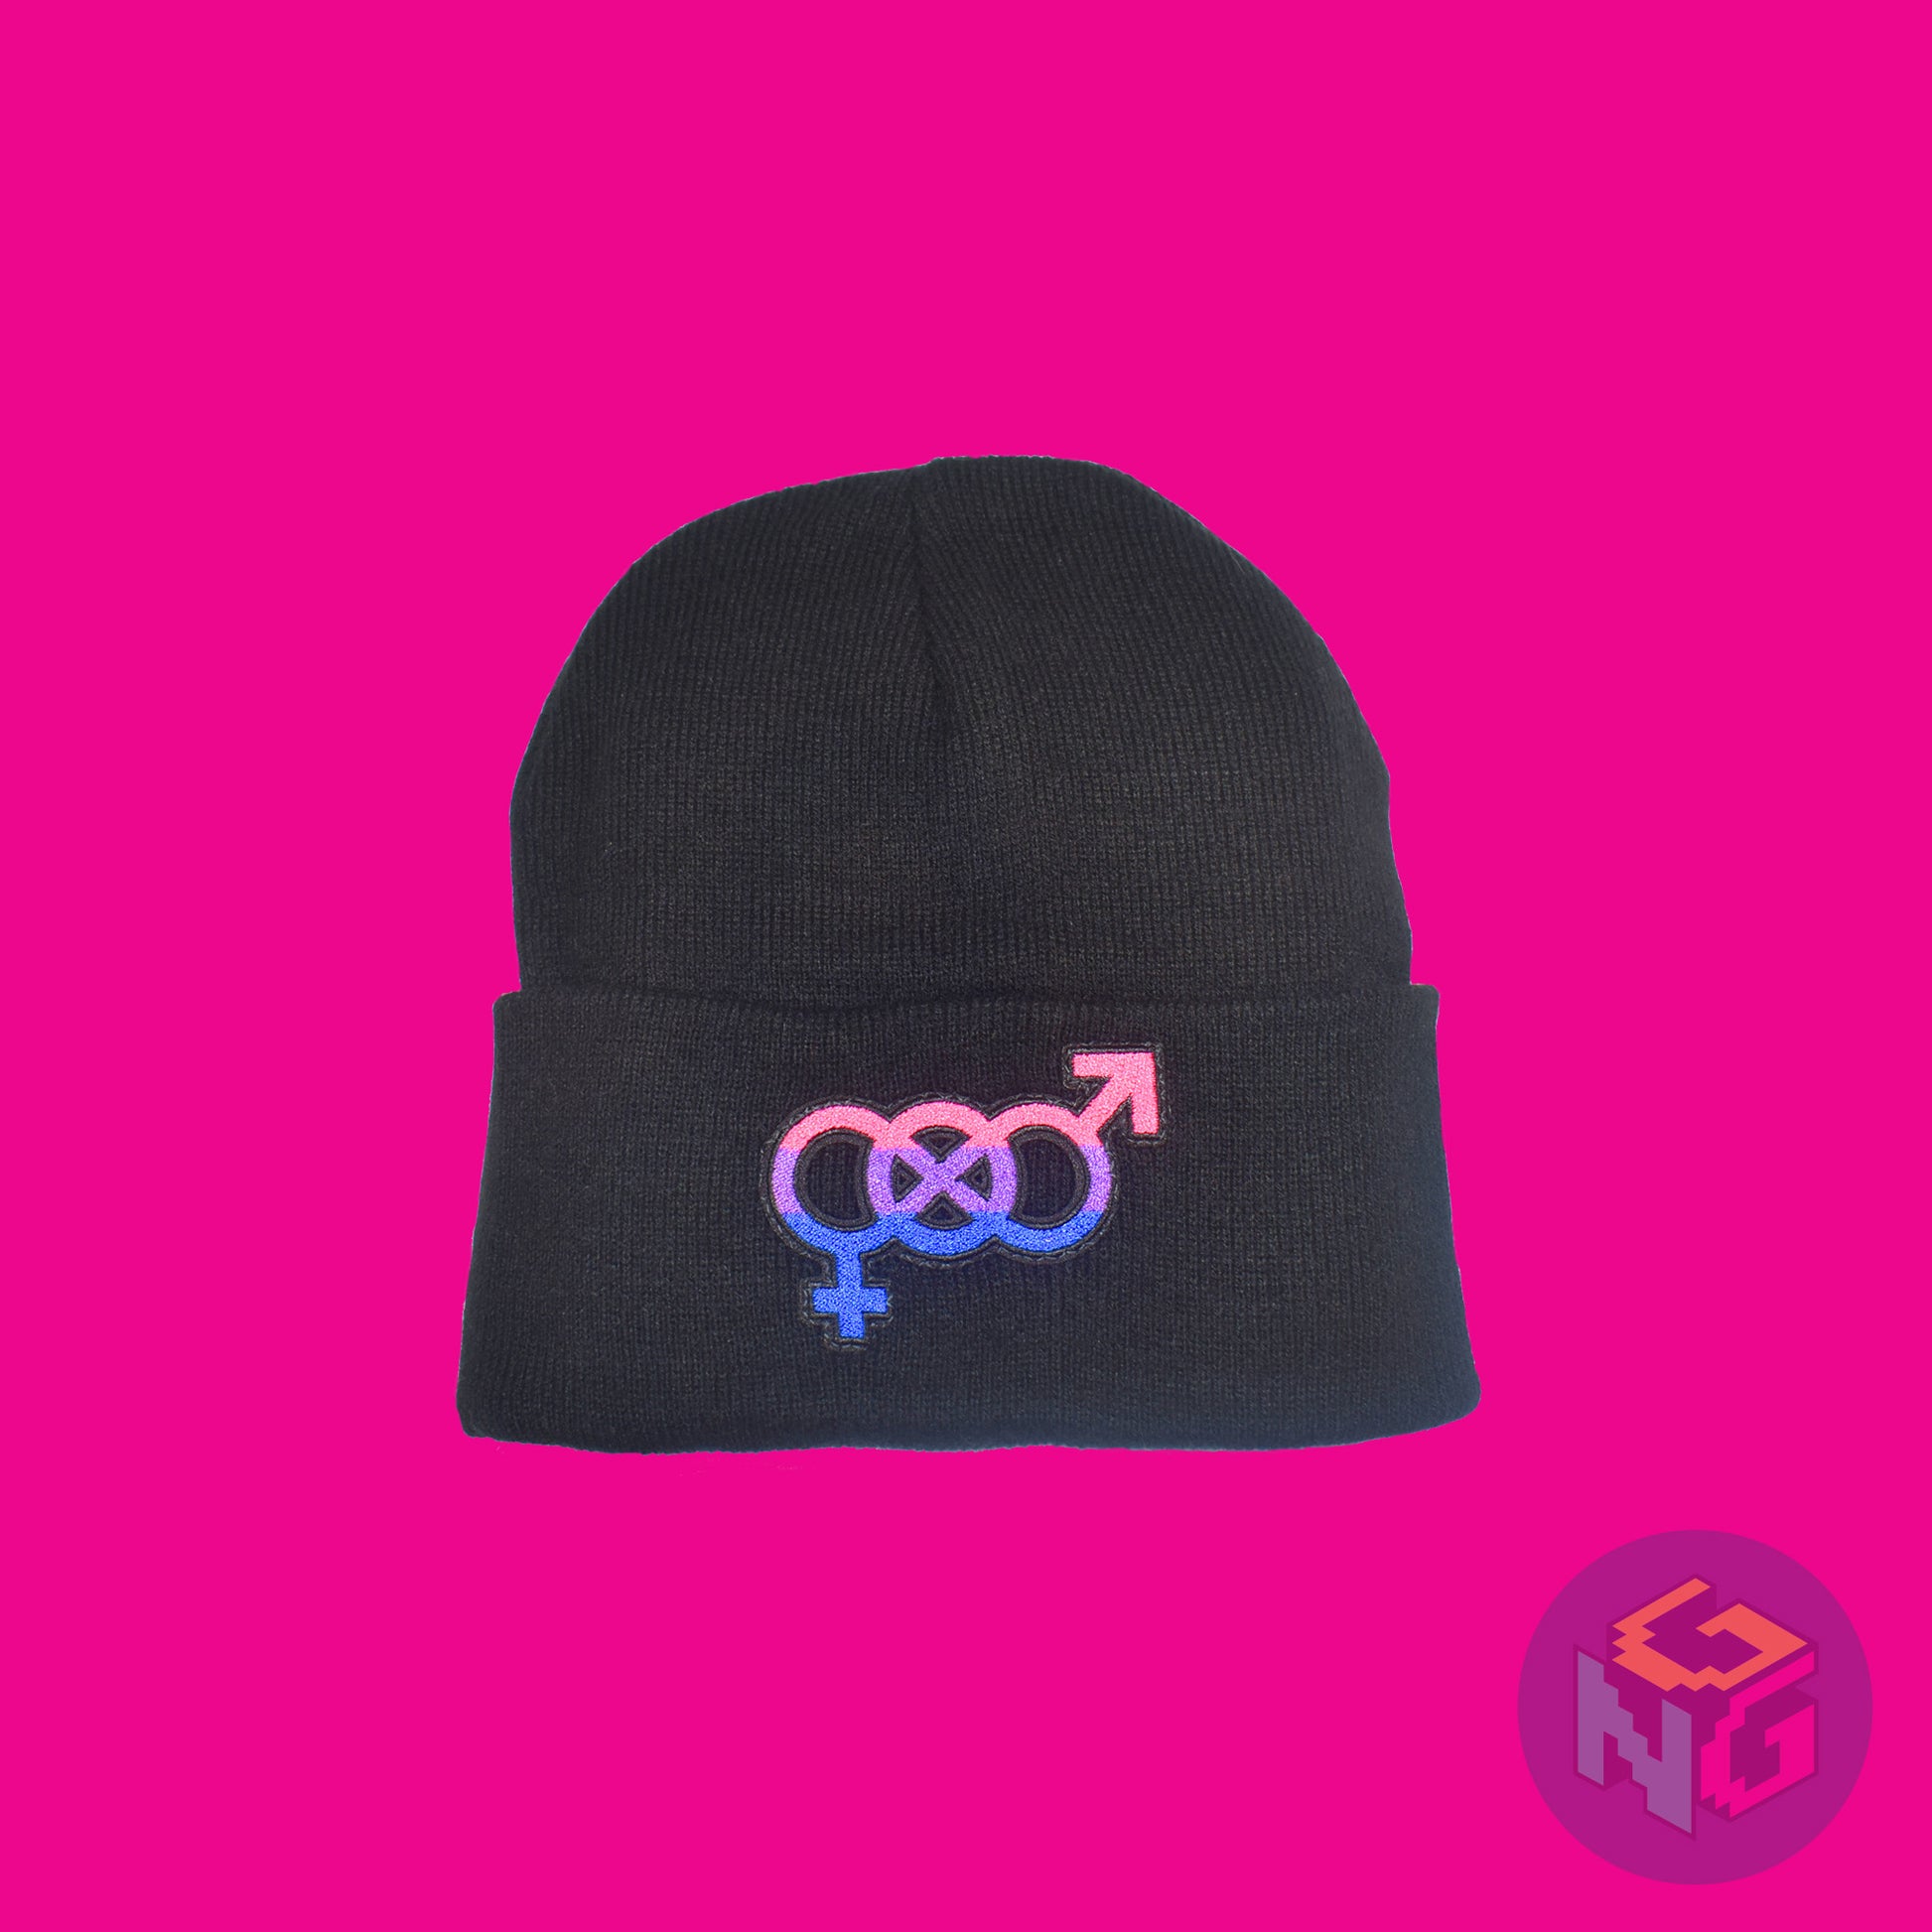 Black knit fabric beanie with the bisexual symbol in asexual pink, purple, and blue on the front. It is laying flat on pink background